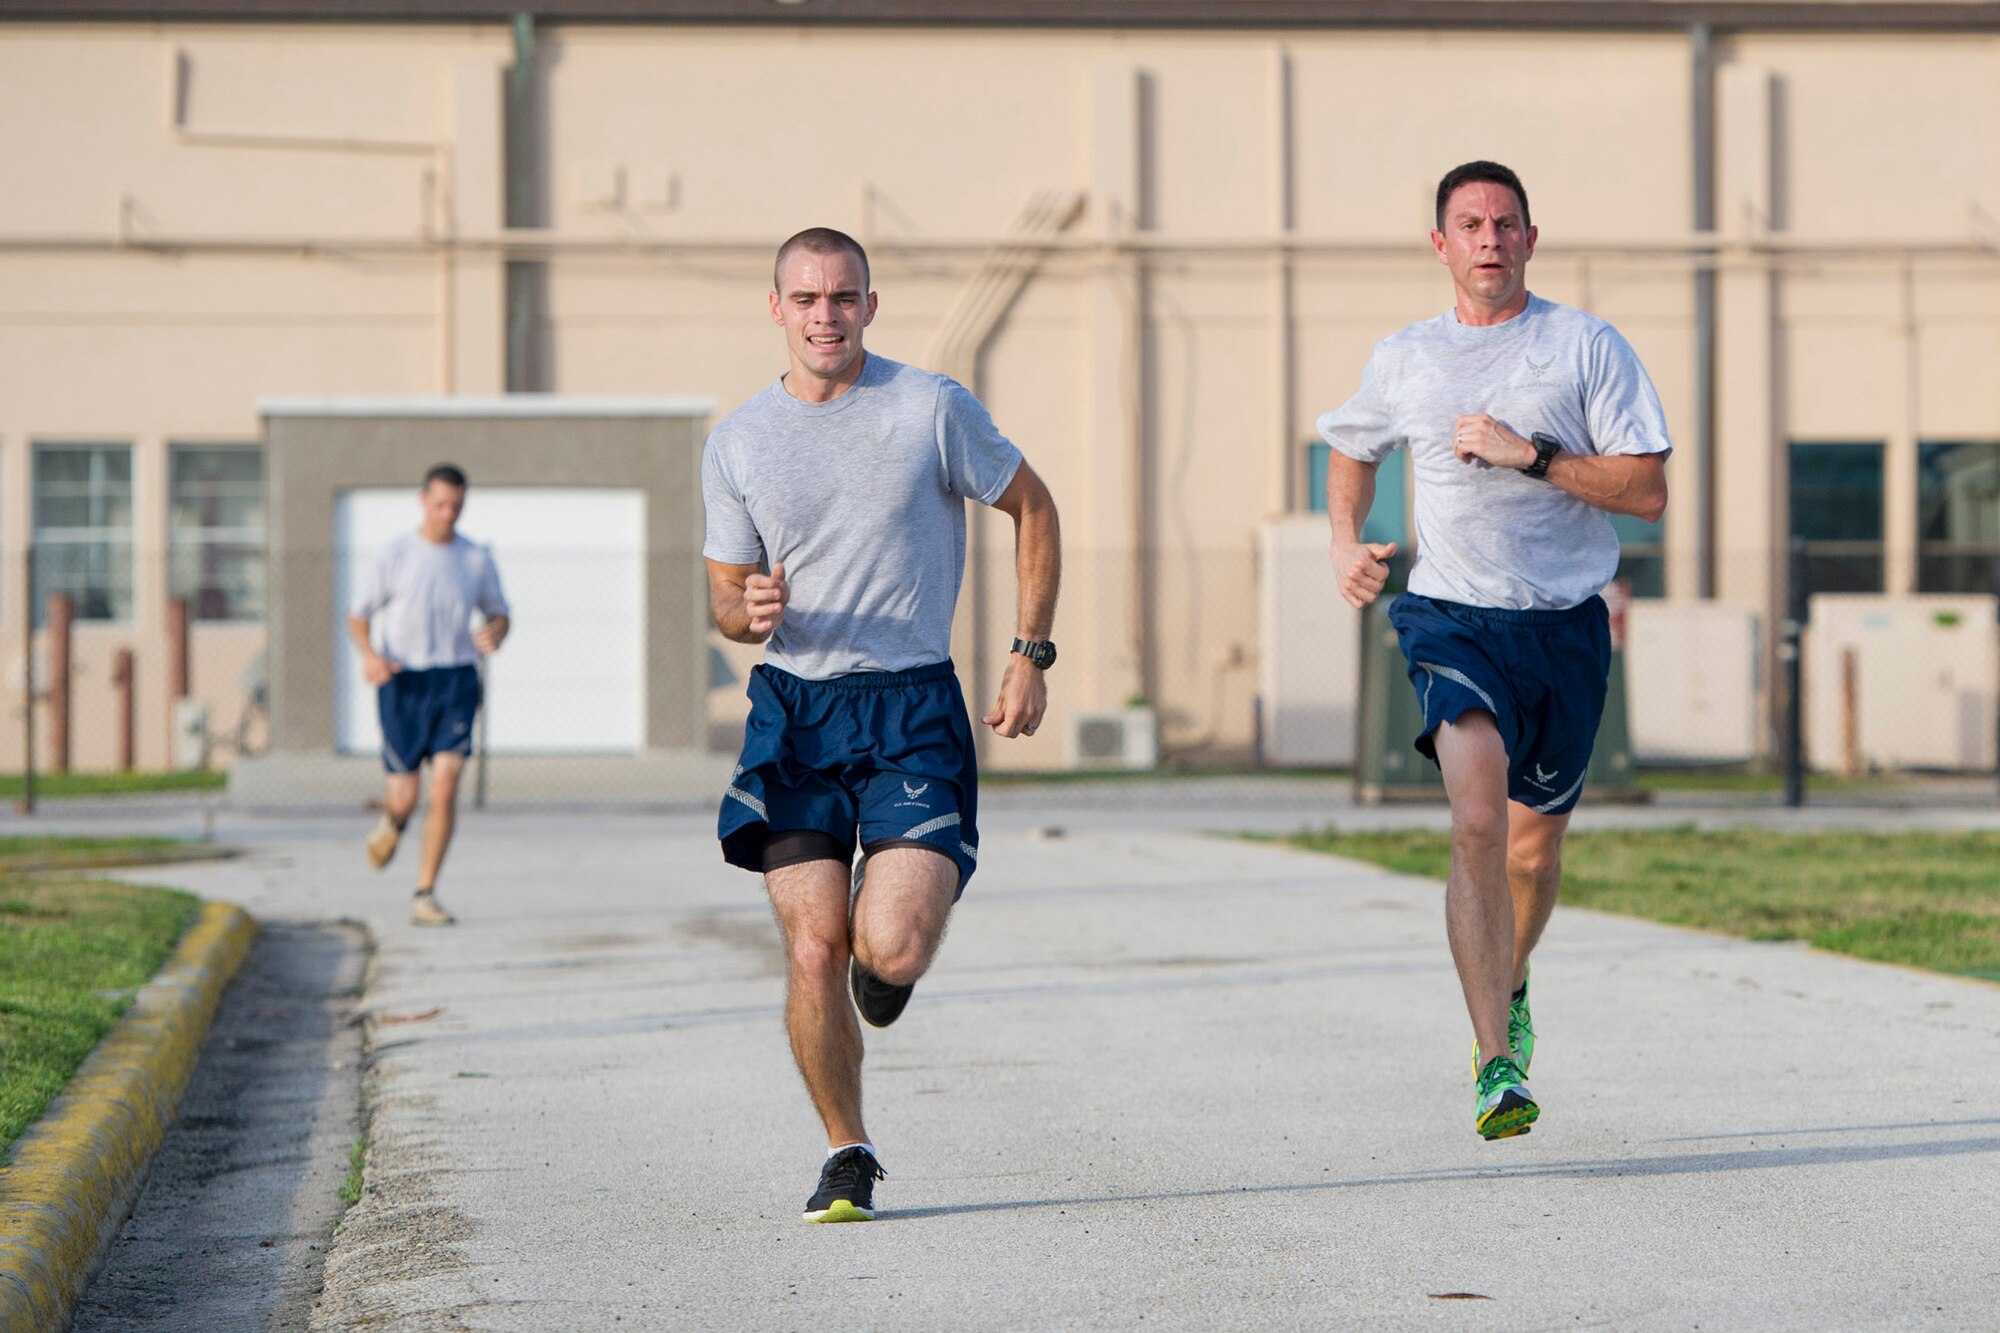 Members of the 45th Space Wing participated in a Quarterly Wing Run lead by the 45th Security Forces Squadron, as part of National Police Week. Participants had three options for this unique Wing Run. Options included: a 5K run in Air Force physical training gear, a 2-Mile Ruck March in ABUs with ruck weight, or a 5K Ruck March in ABUs. (U.S. Air Force photos/Matthew Jurgens/Released)